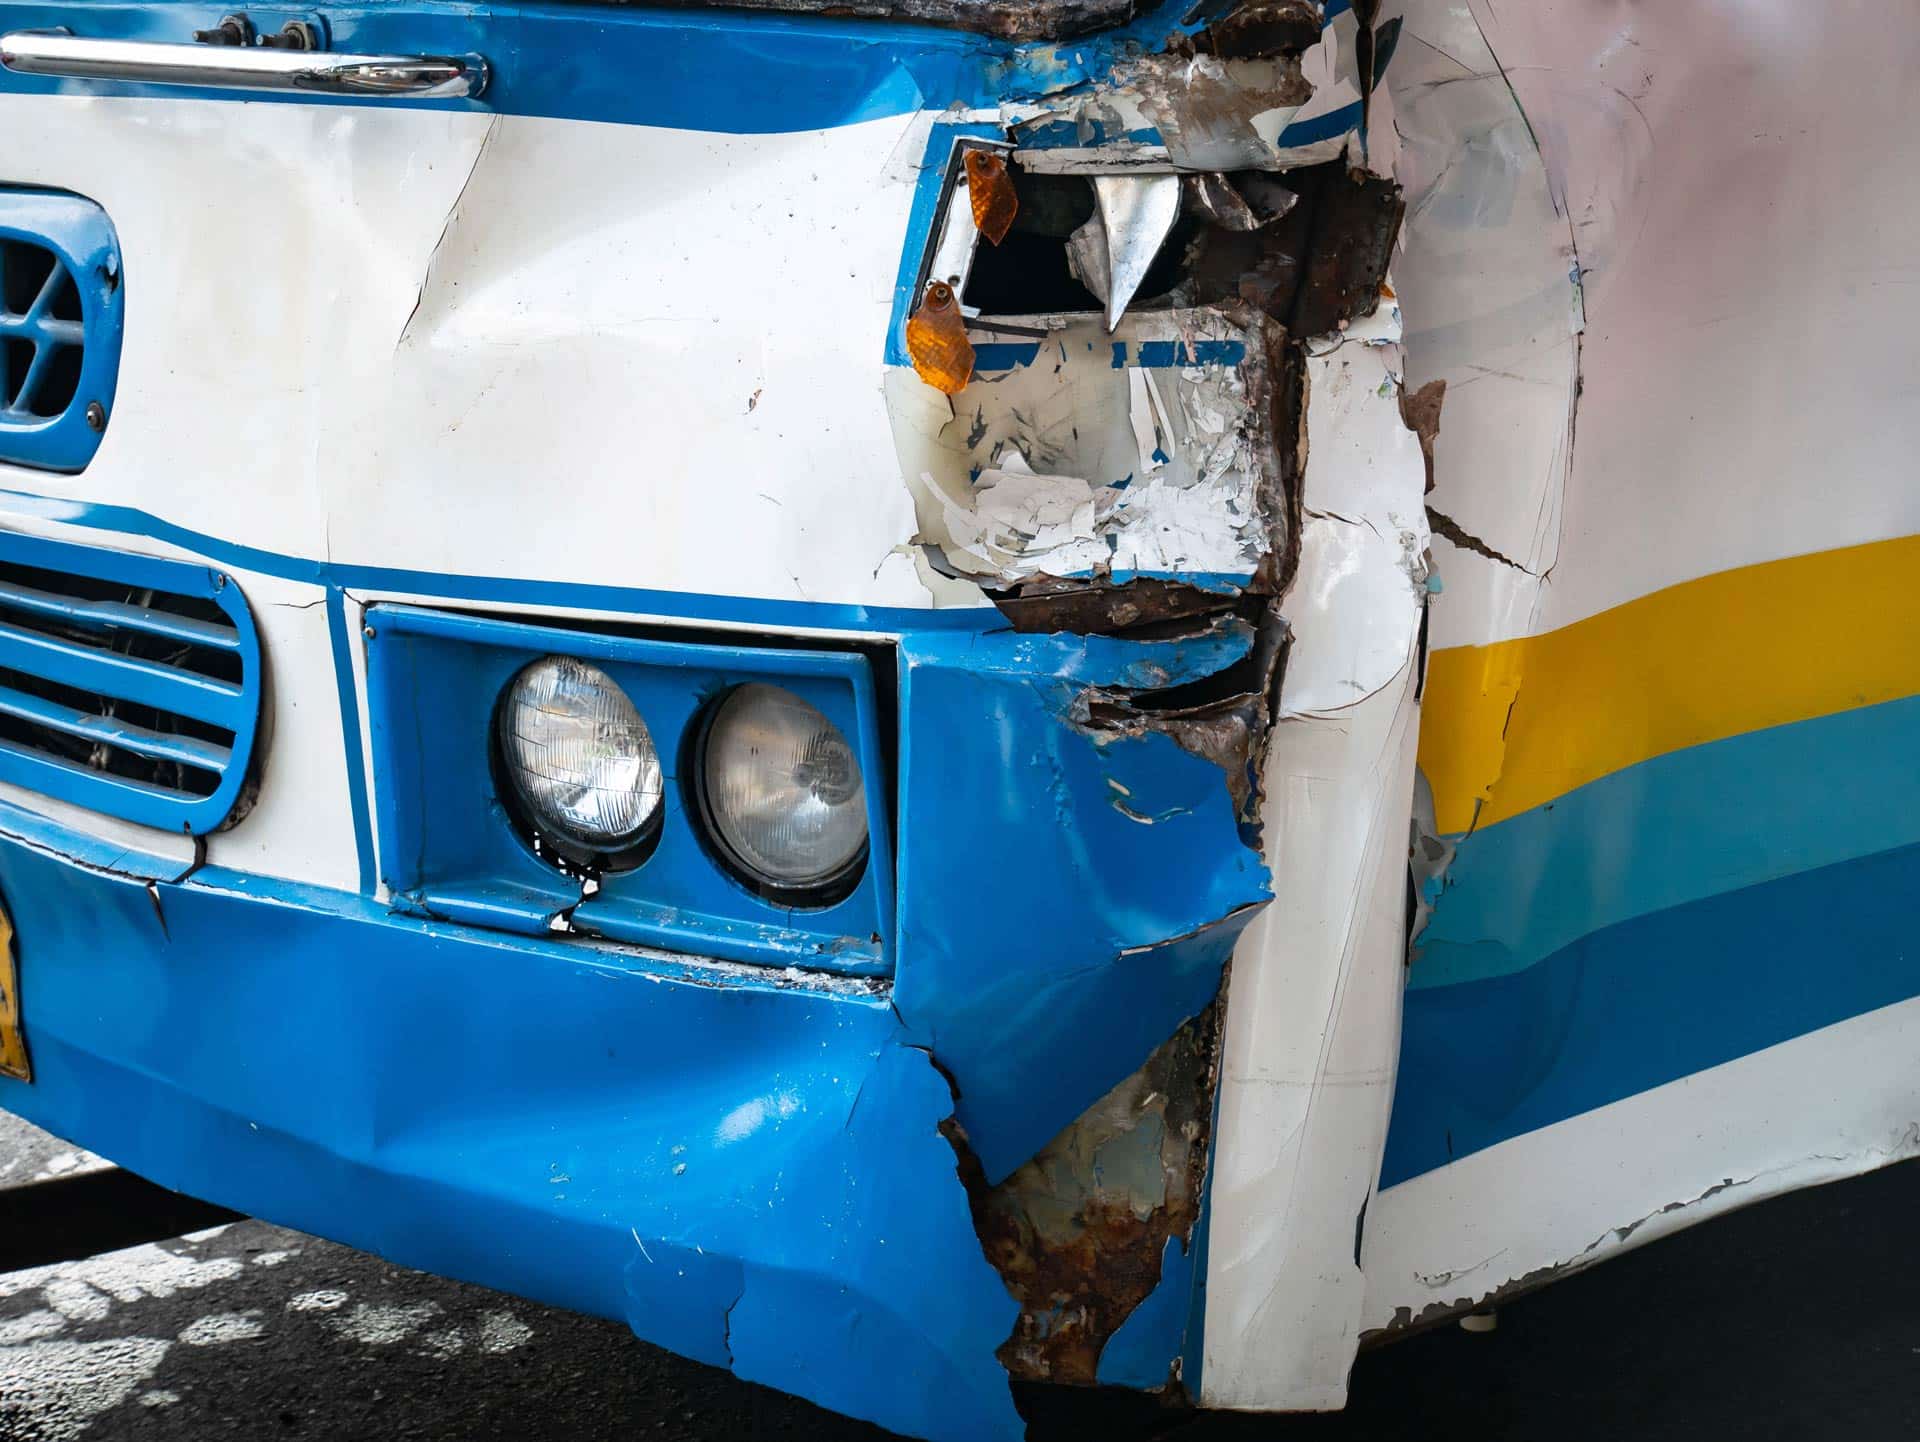 Damaged bus from the accident